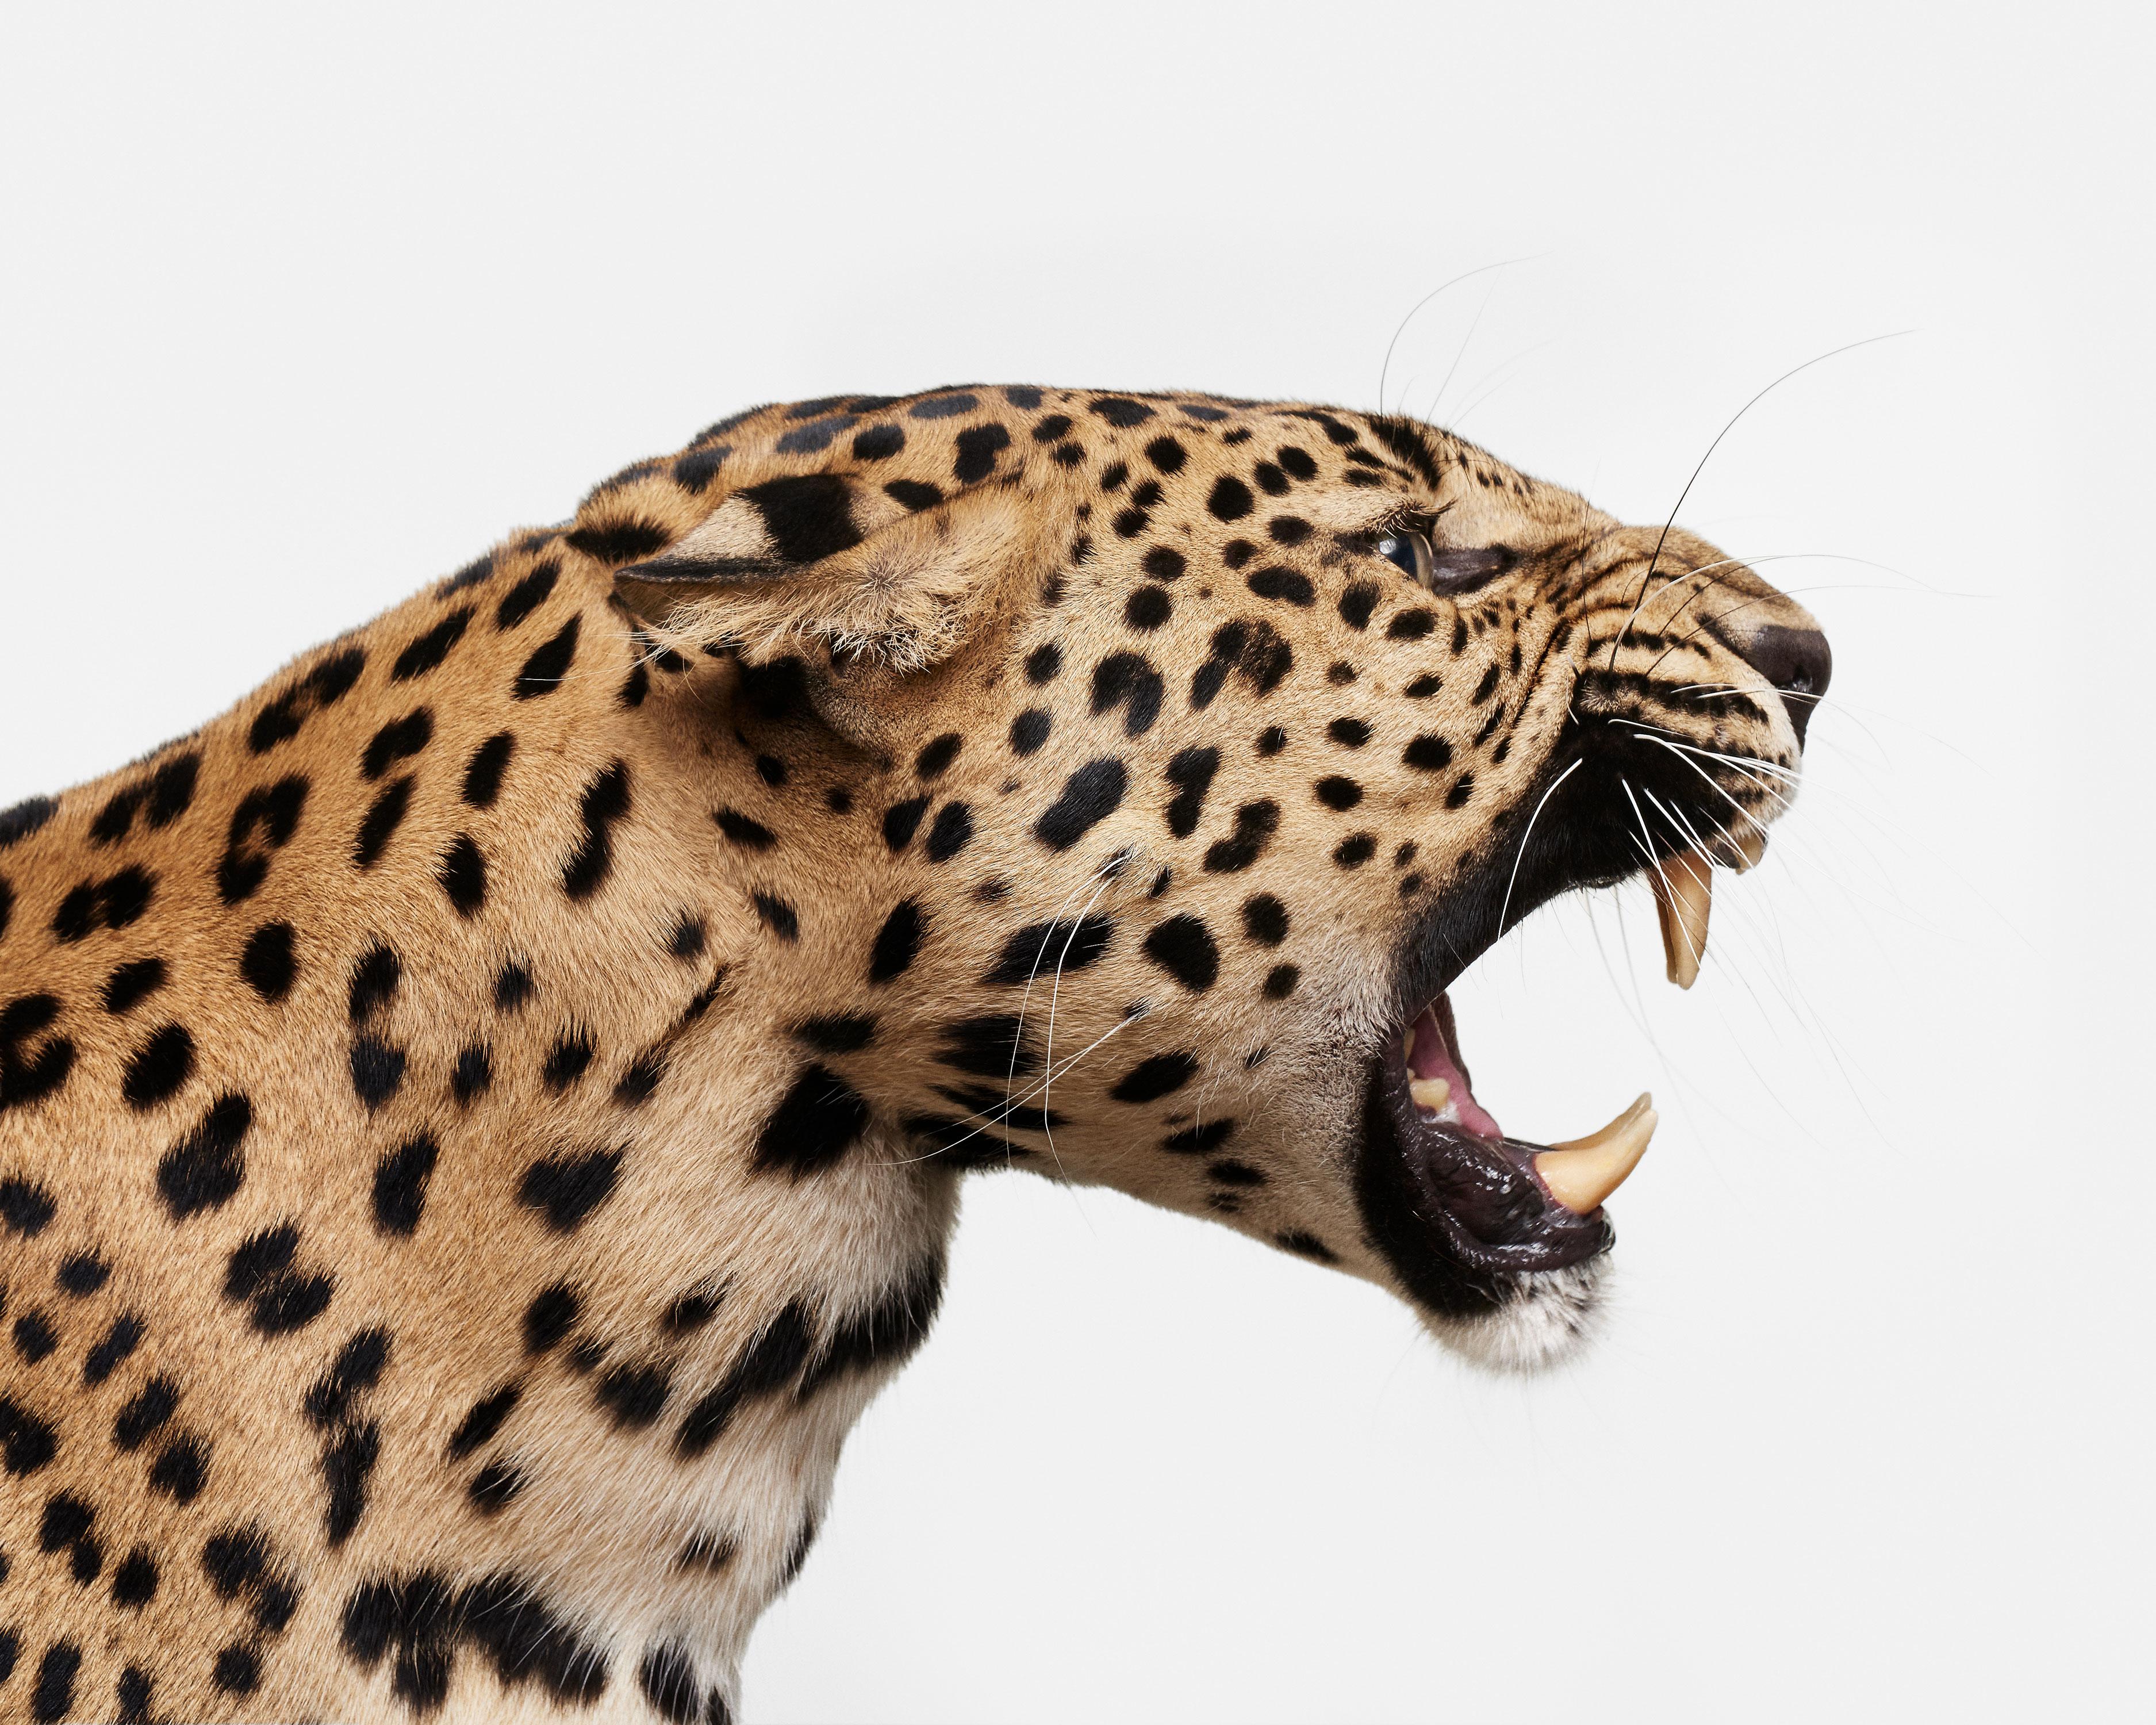 Randal Ford Animal Print - Spotted Leopard Snarl (48" x 72")